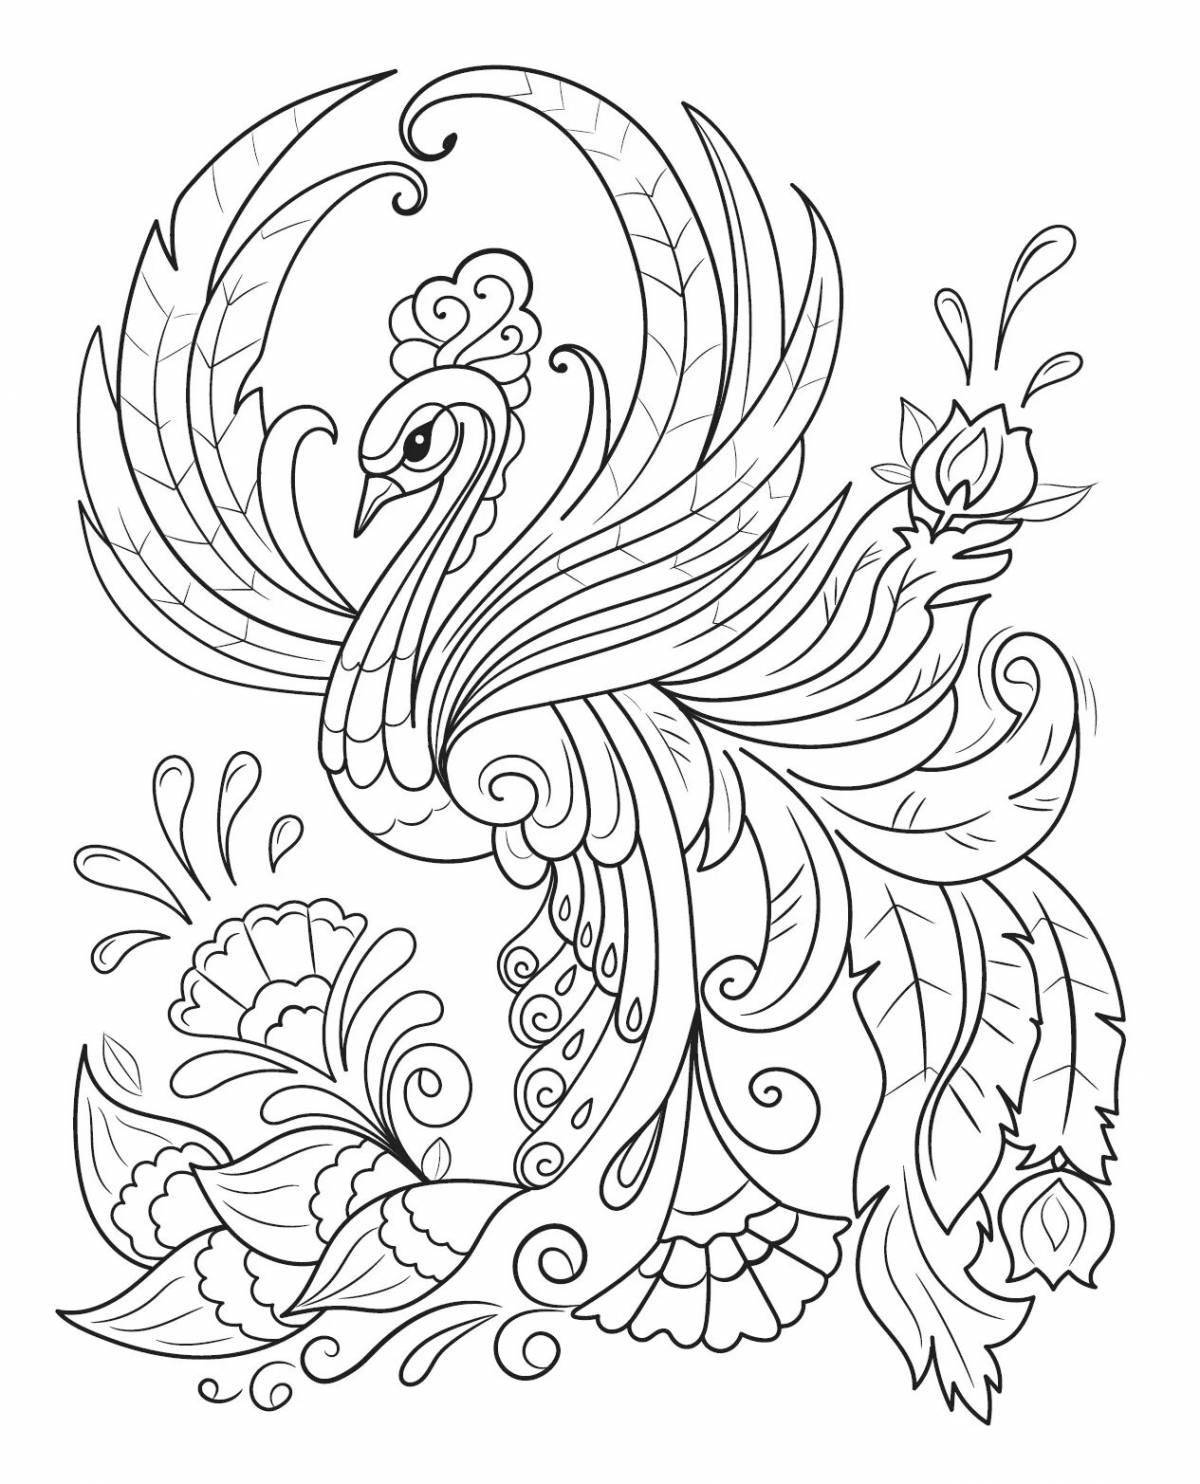 Colorful fire birds coloring page for kids